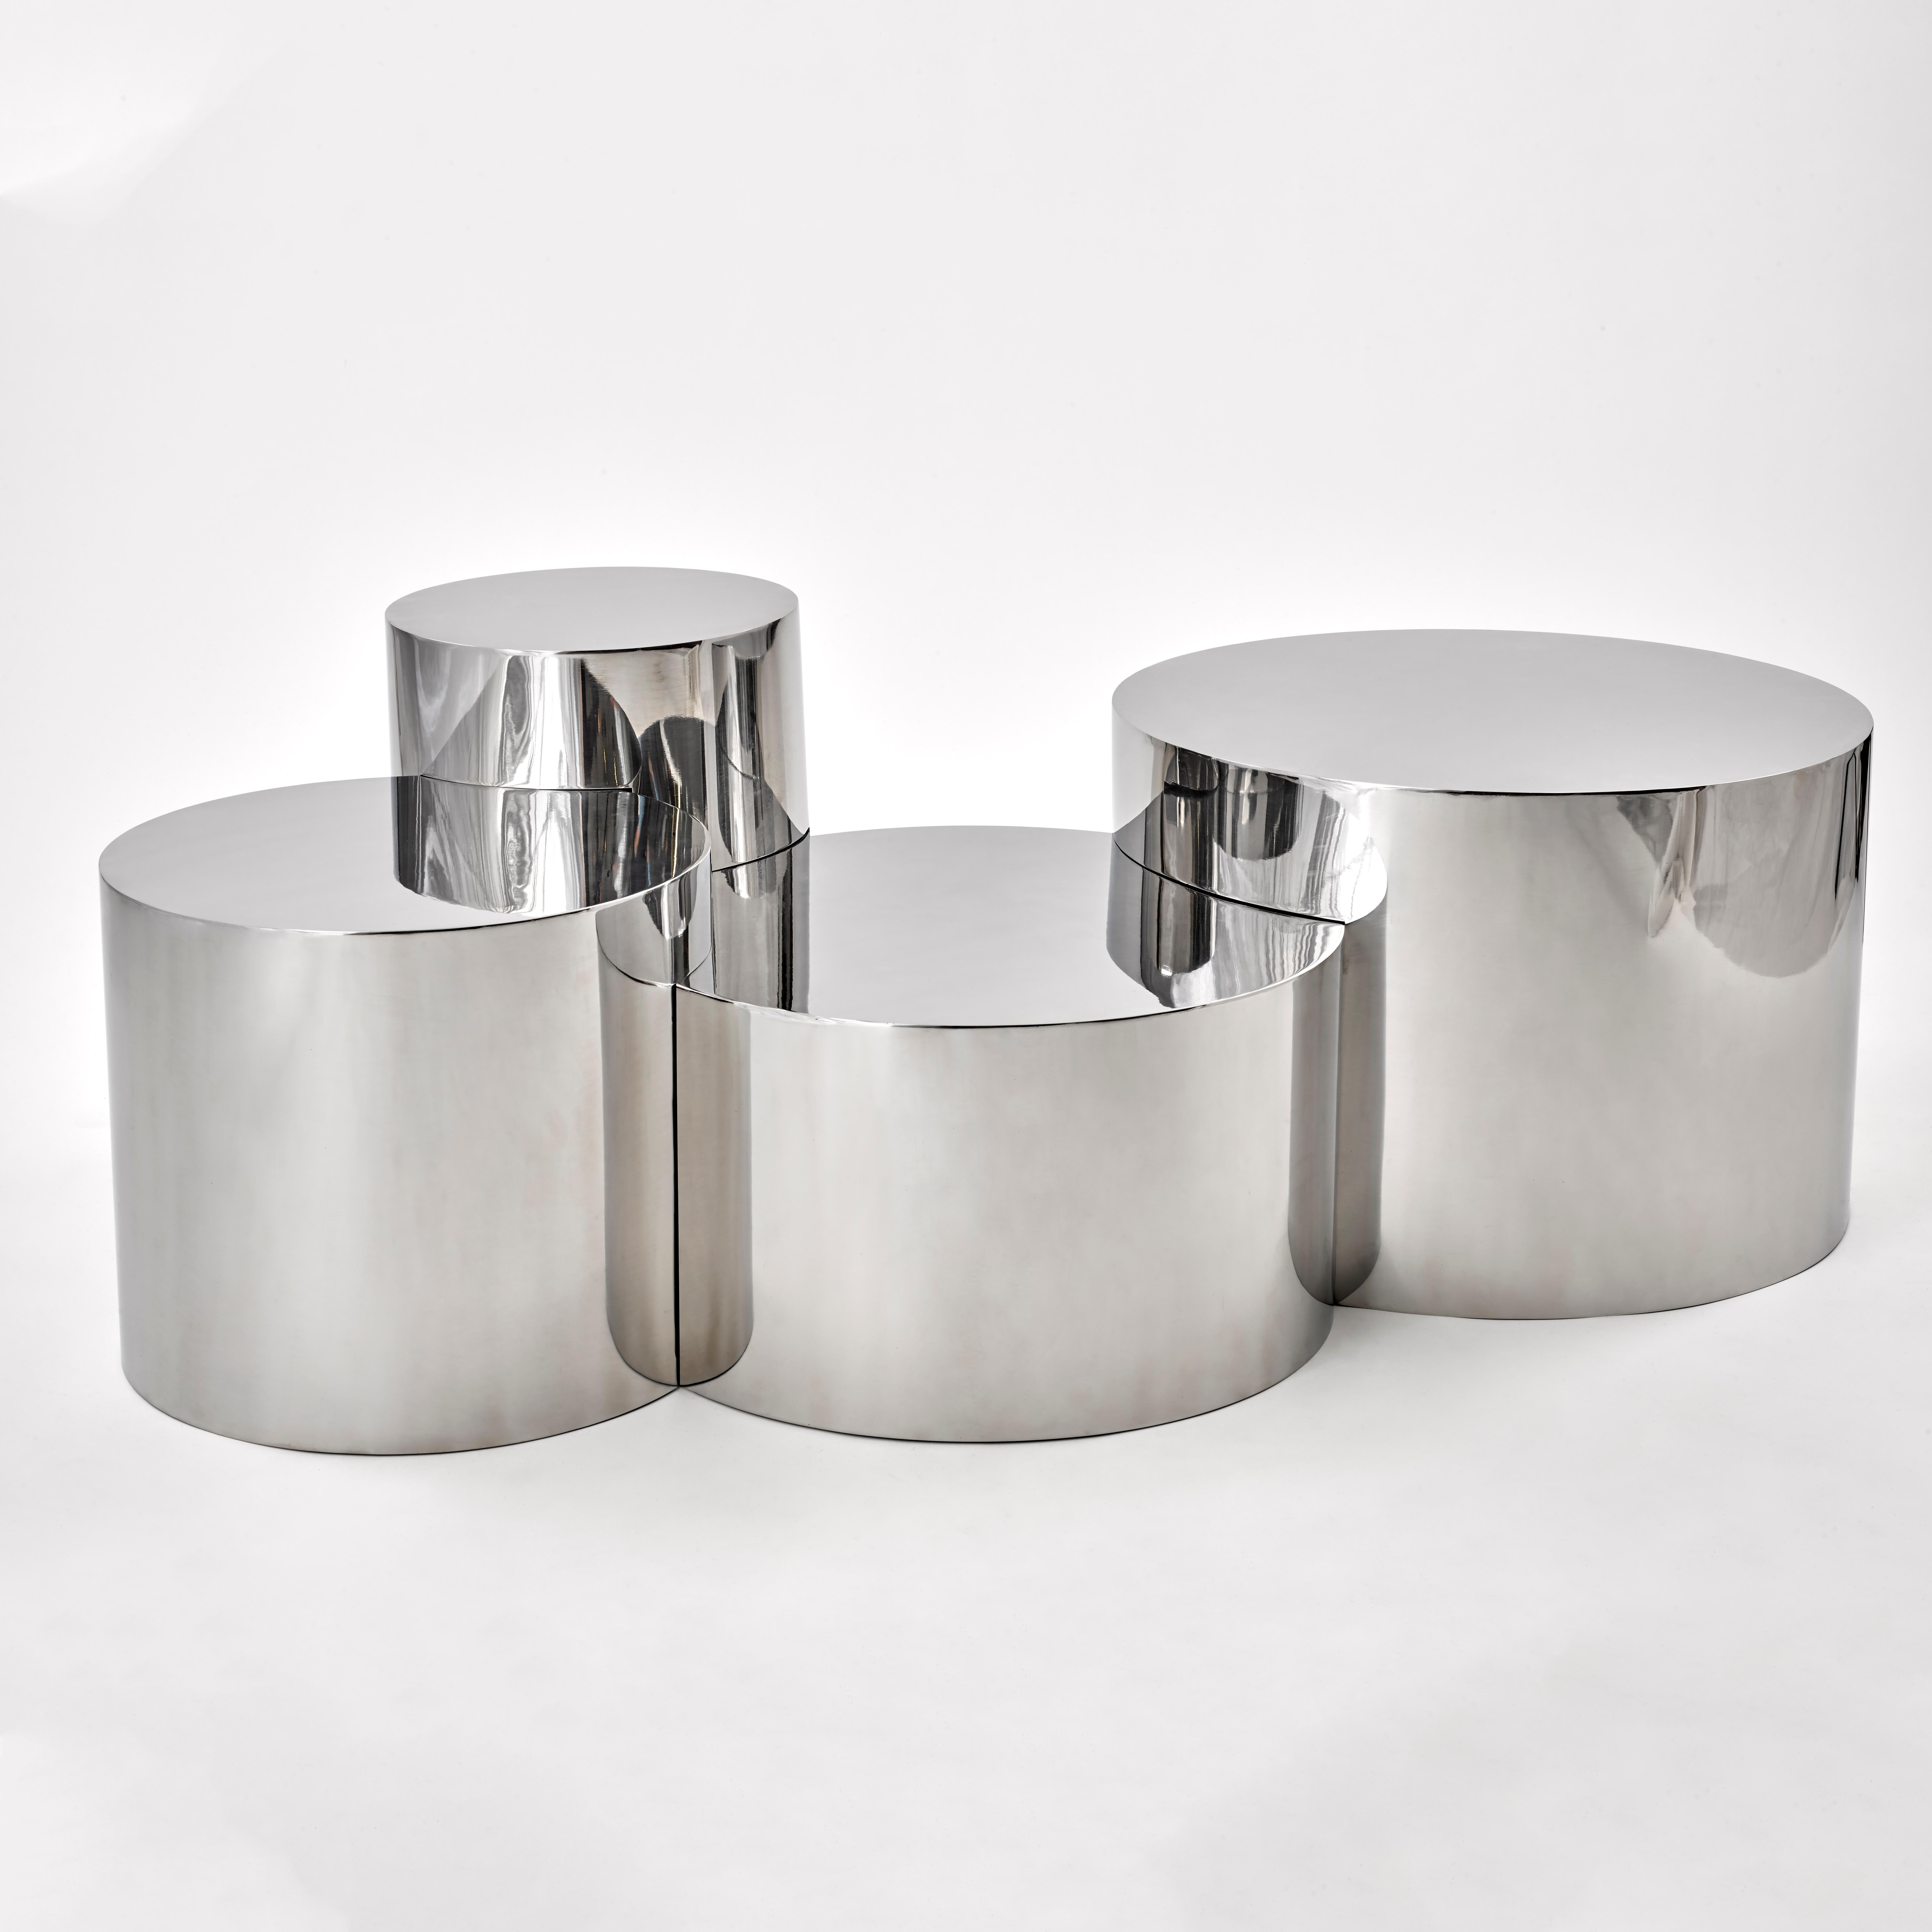 The Geometria: Cerchi #4 table elevates the minimalist form of the cylinder by joining and overlapping them to create a highly sculptural piece. Shown in polished steel with four cylinders.

Customization Options: 

Each piece is hand crafted in